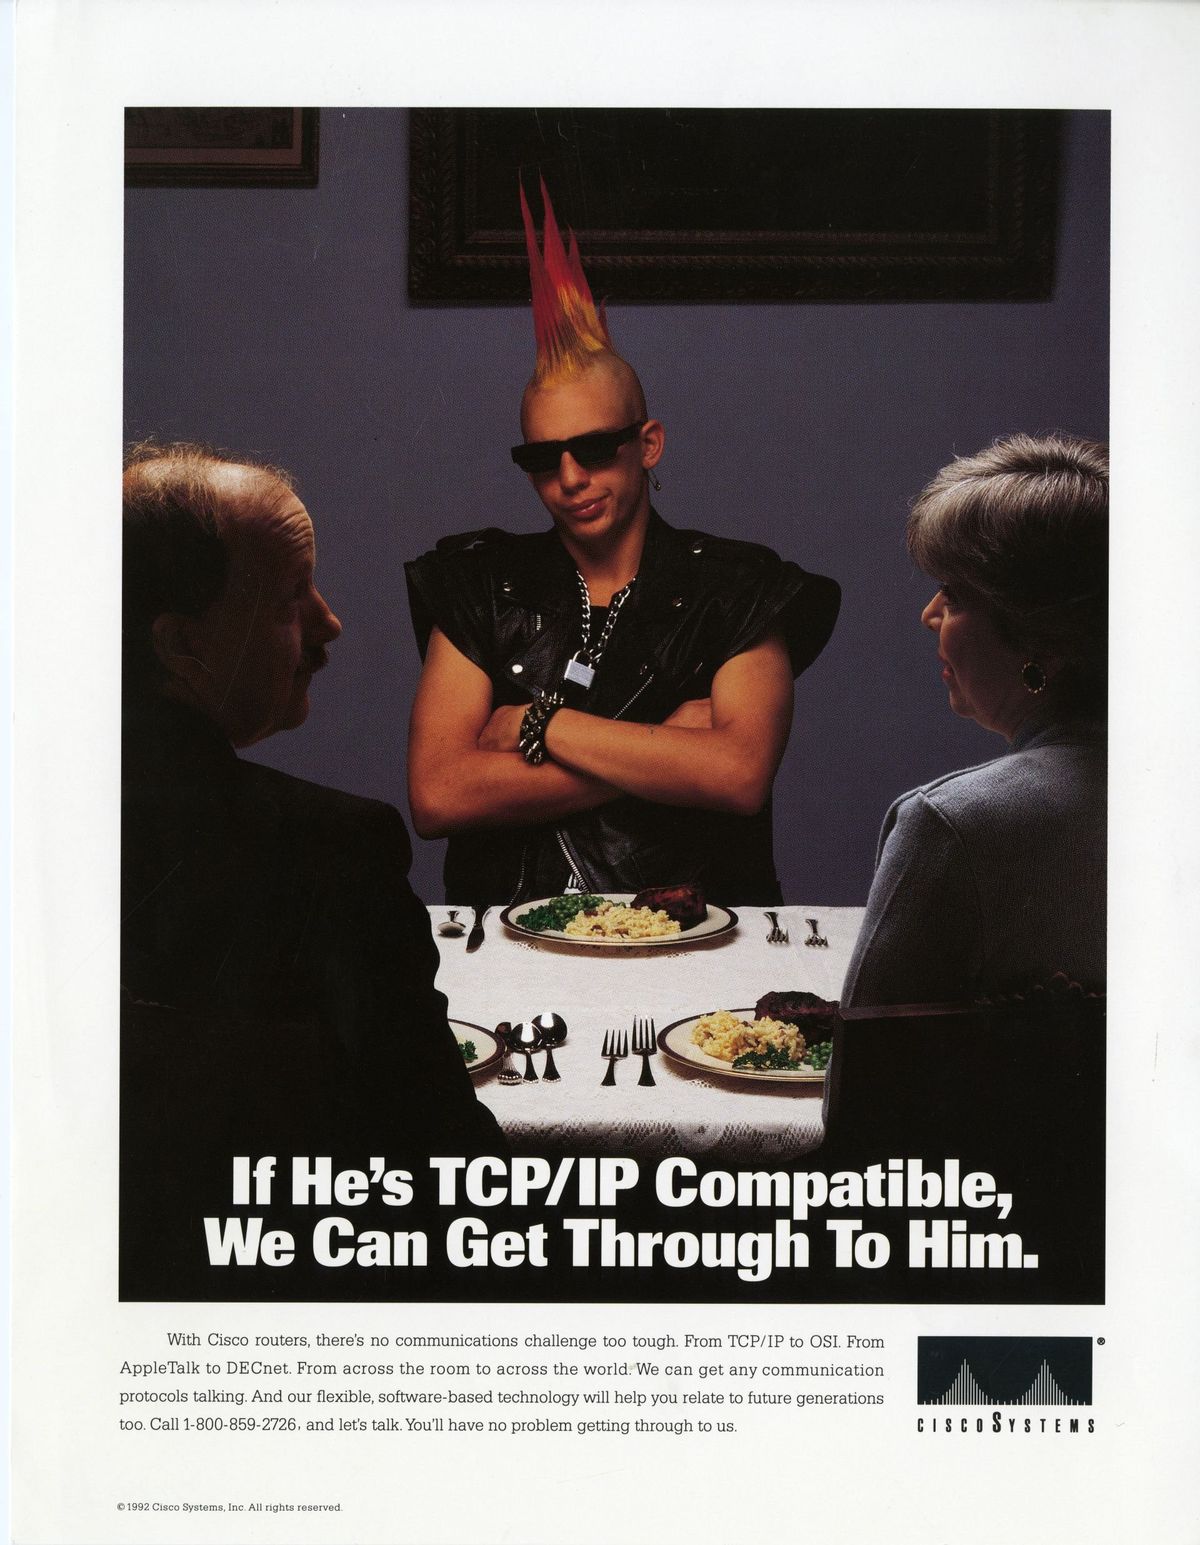 A young punk with a pink mohawk sits at a dinner table with his arms crossed and frowning, the shadow of a woman and father implied to be his parents face him, with their back to the camera but their faces tilted in a questioning way. The text "If He's TCP/IP Compatible, We Can Get Through To Him"